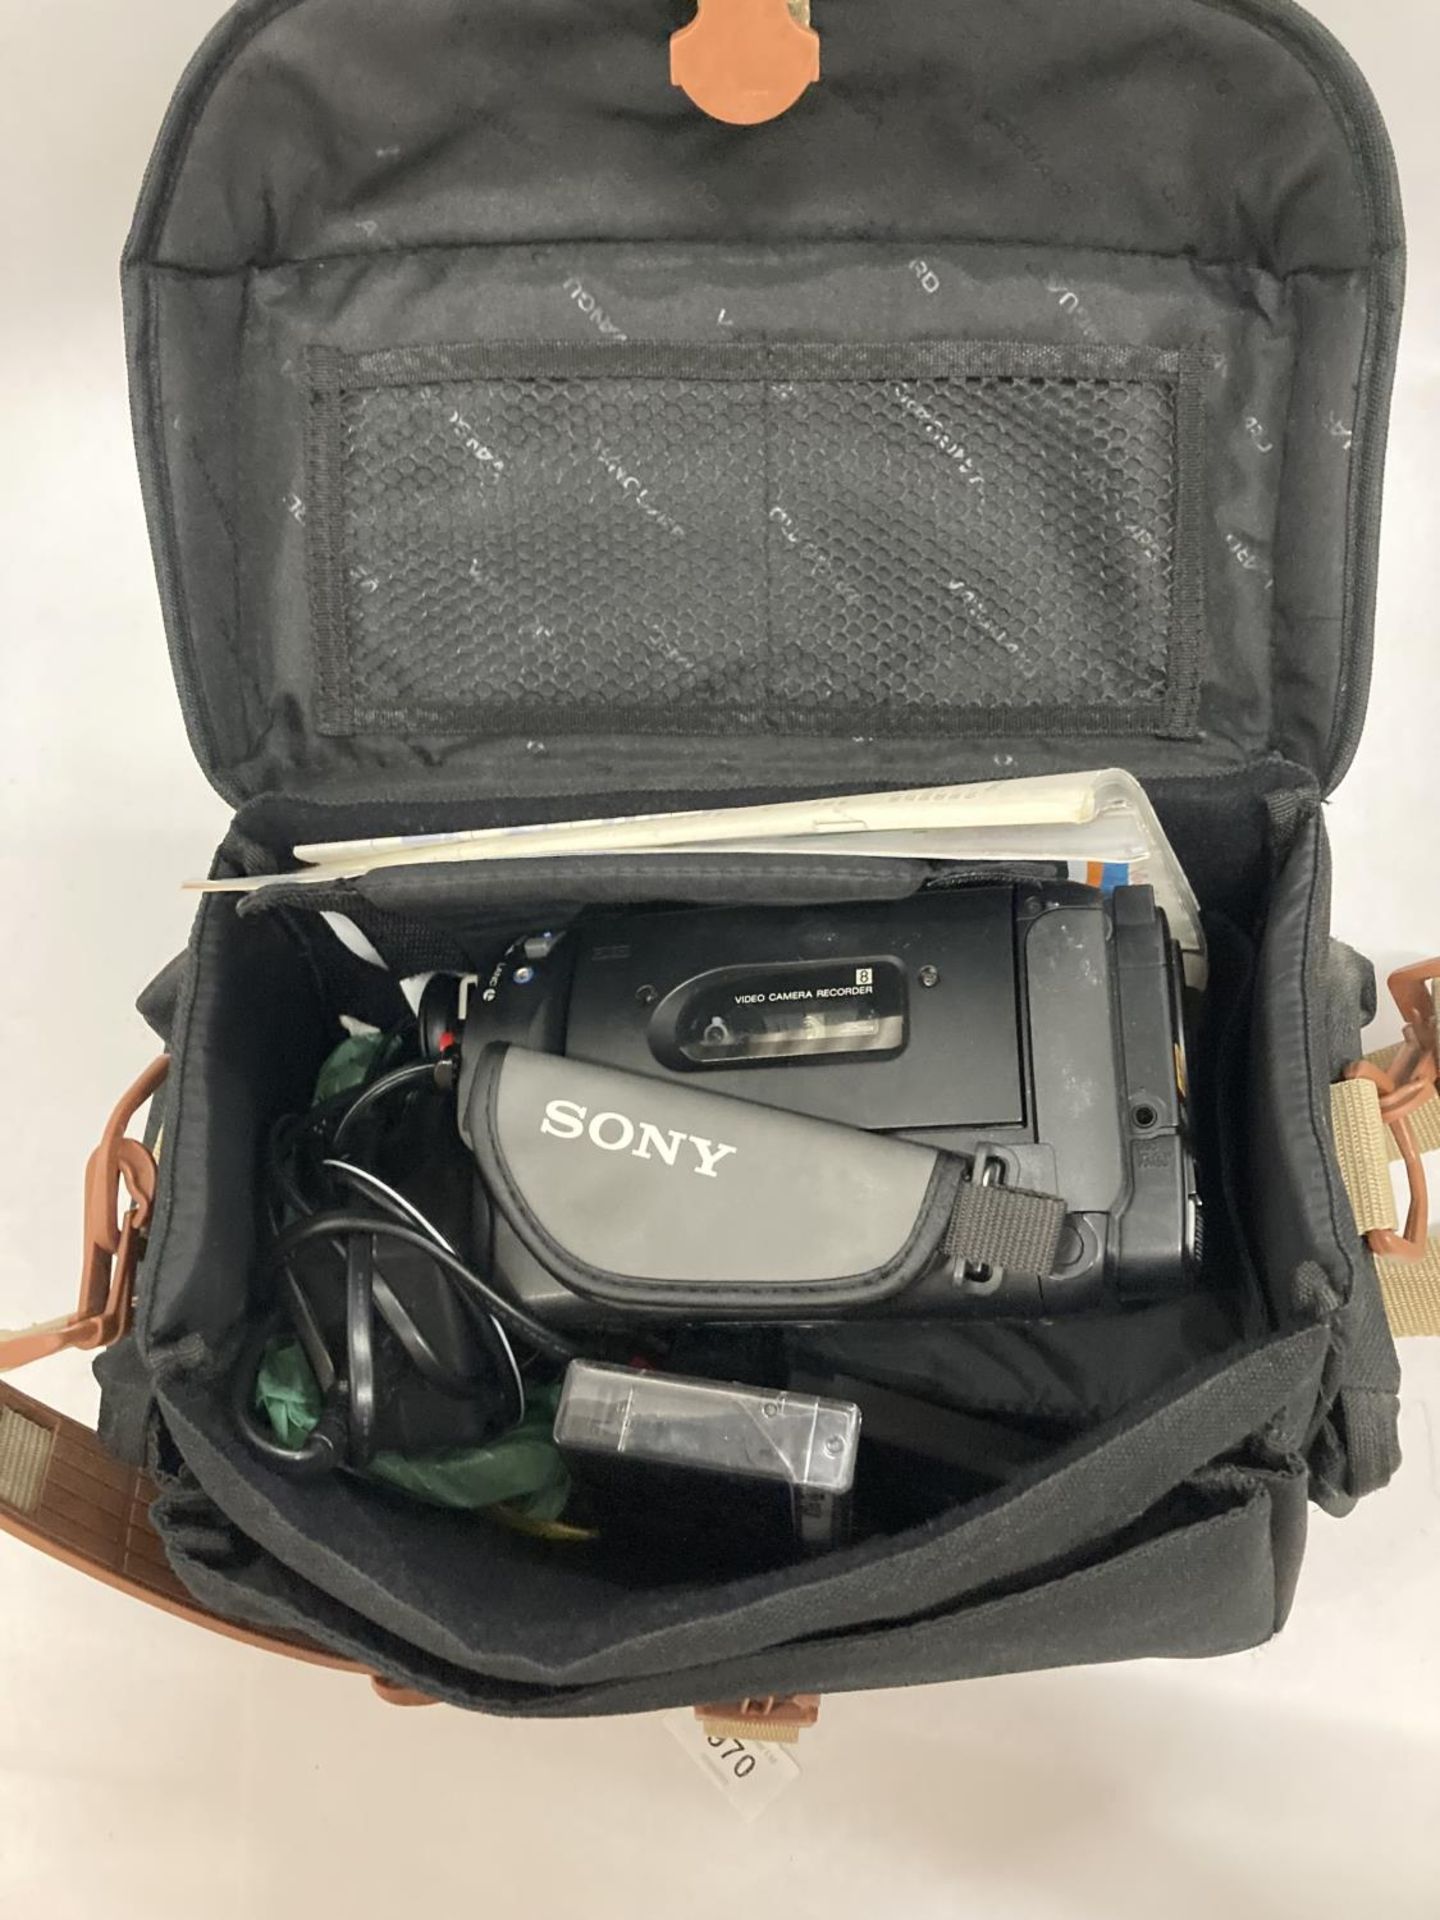 A SONY VIDEO CAMERA RECORDER WITH ACCESSORIES IN A VANGUARD BAG - Image 4 of 10